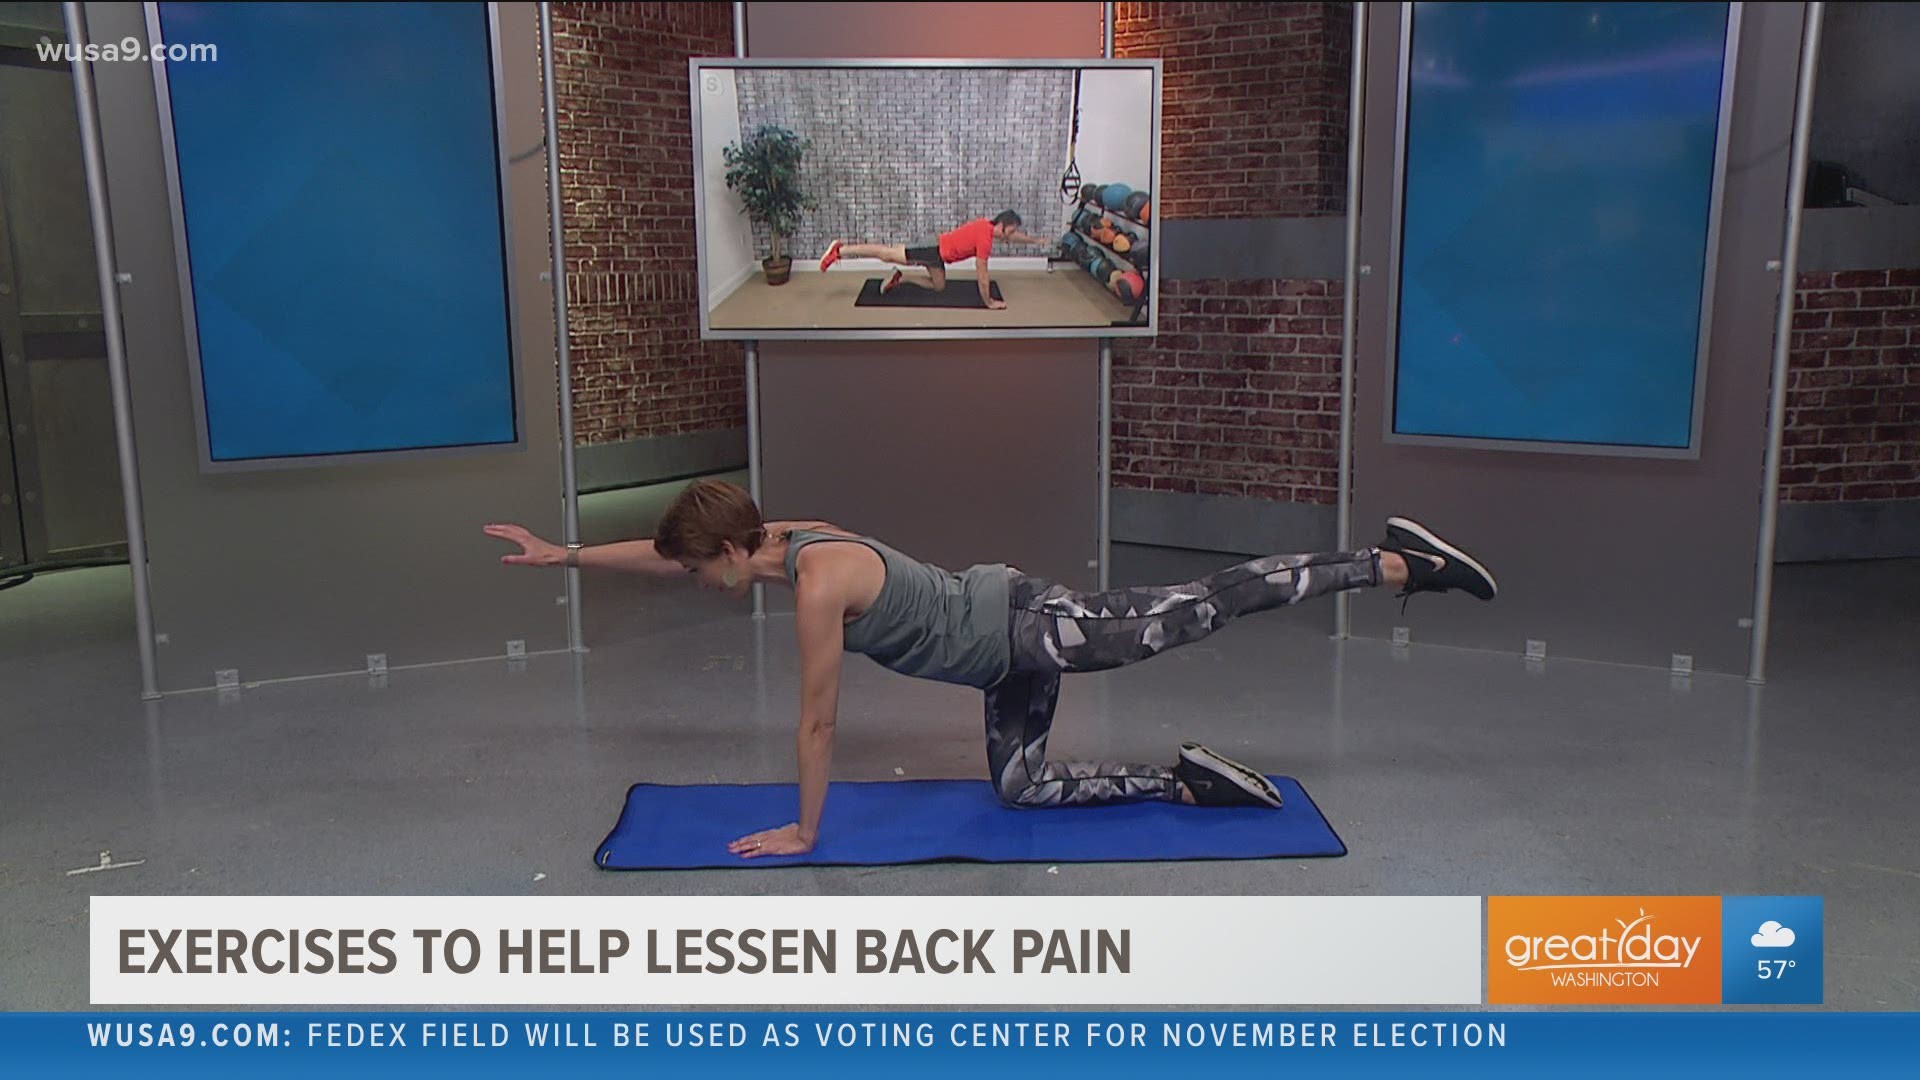 Do you have back pain after working from home over several months? Check out these workout tips from Laurent Amzallag to help. Join Laurent from Mon-Sat on Zoom.